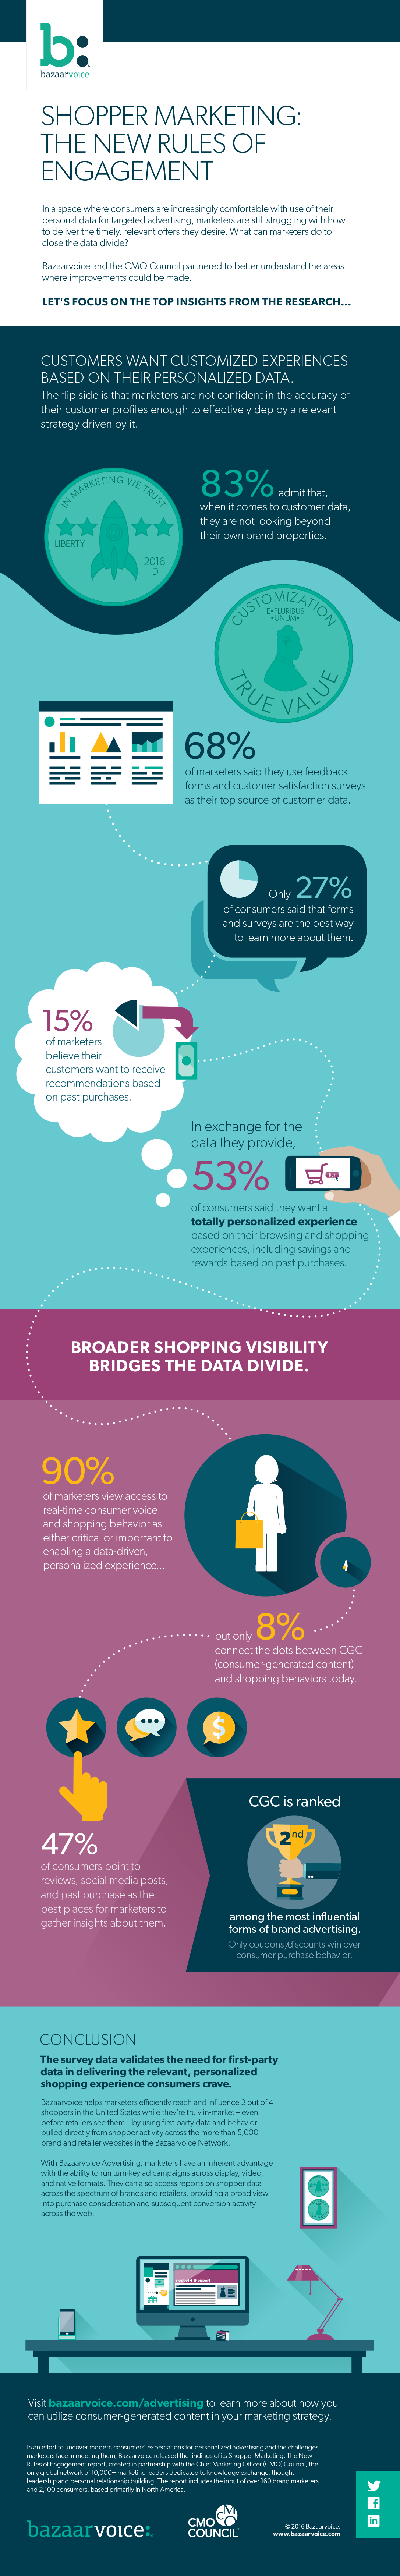 Shopper Marketing: The New Rules of Engagement